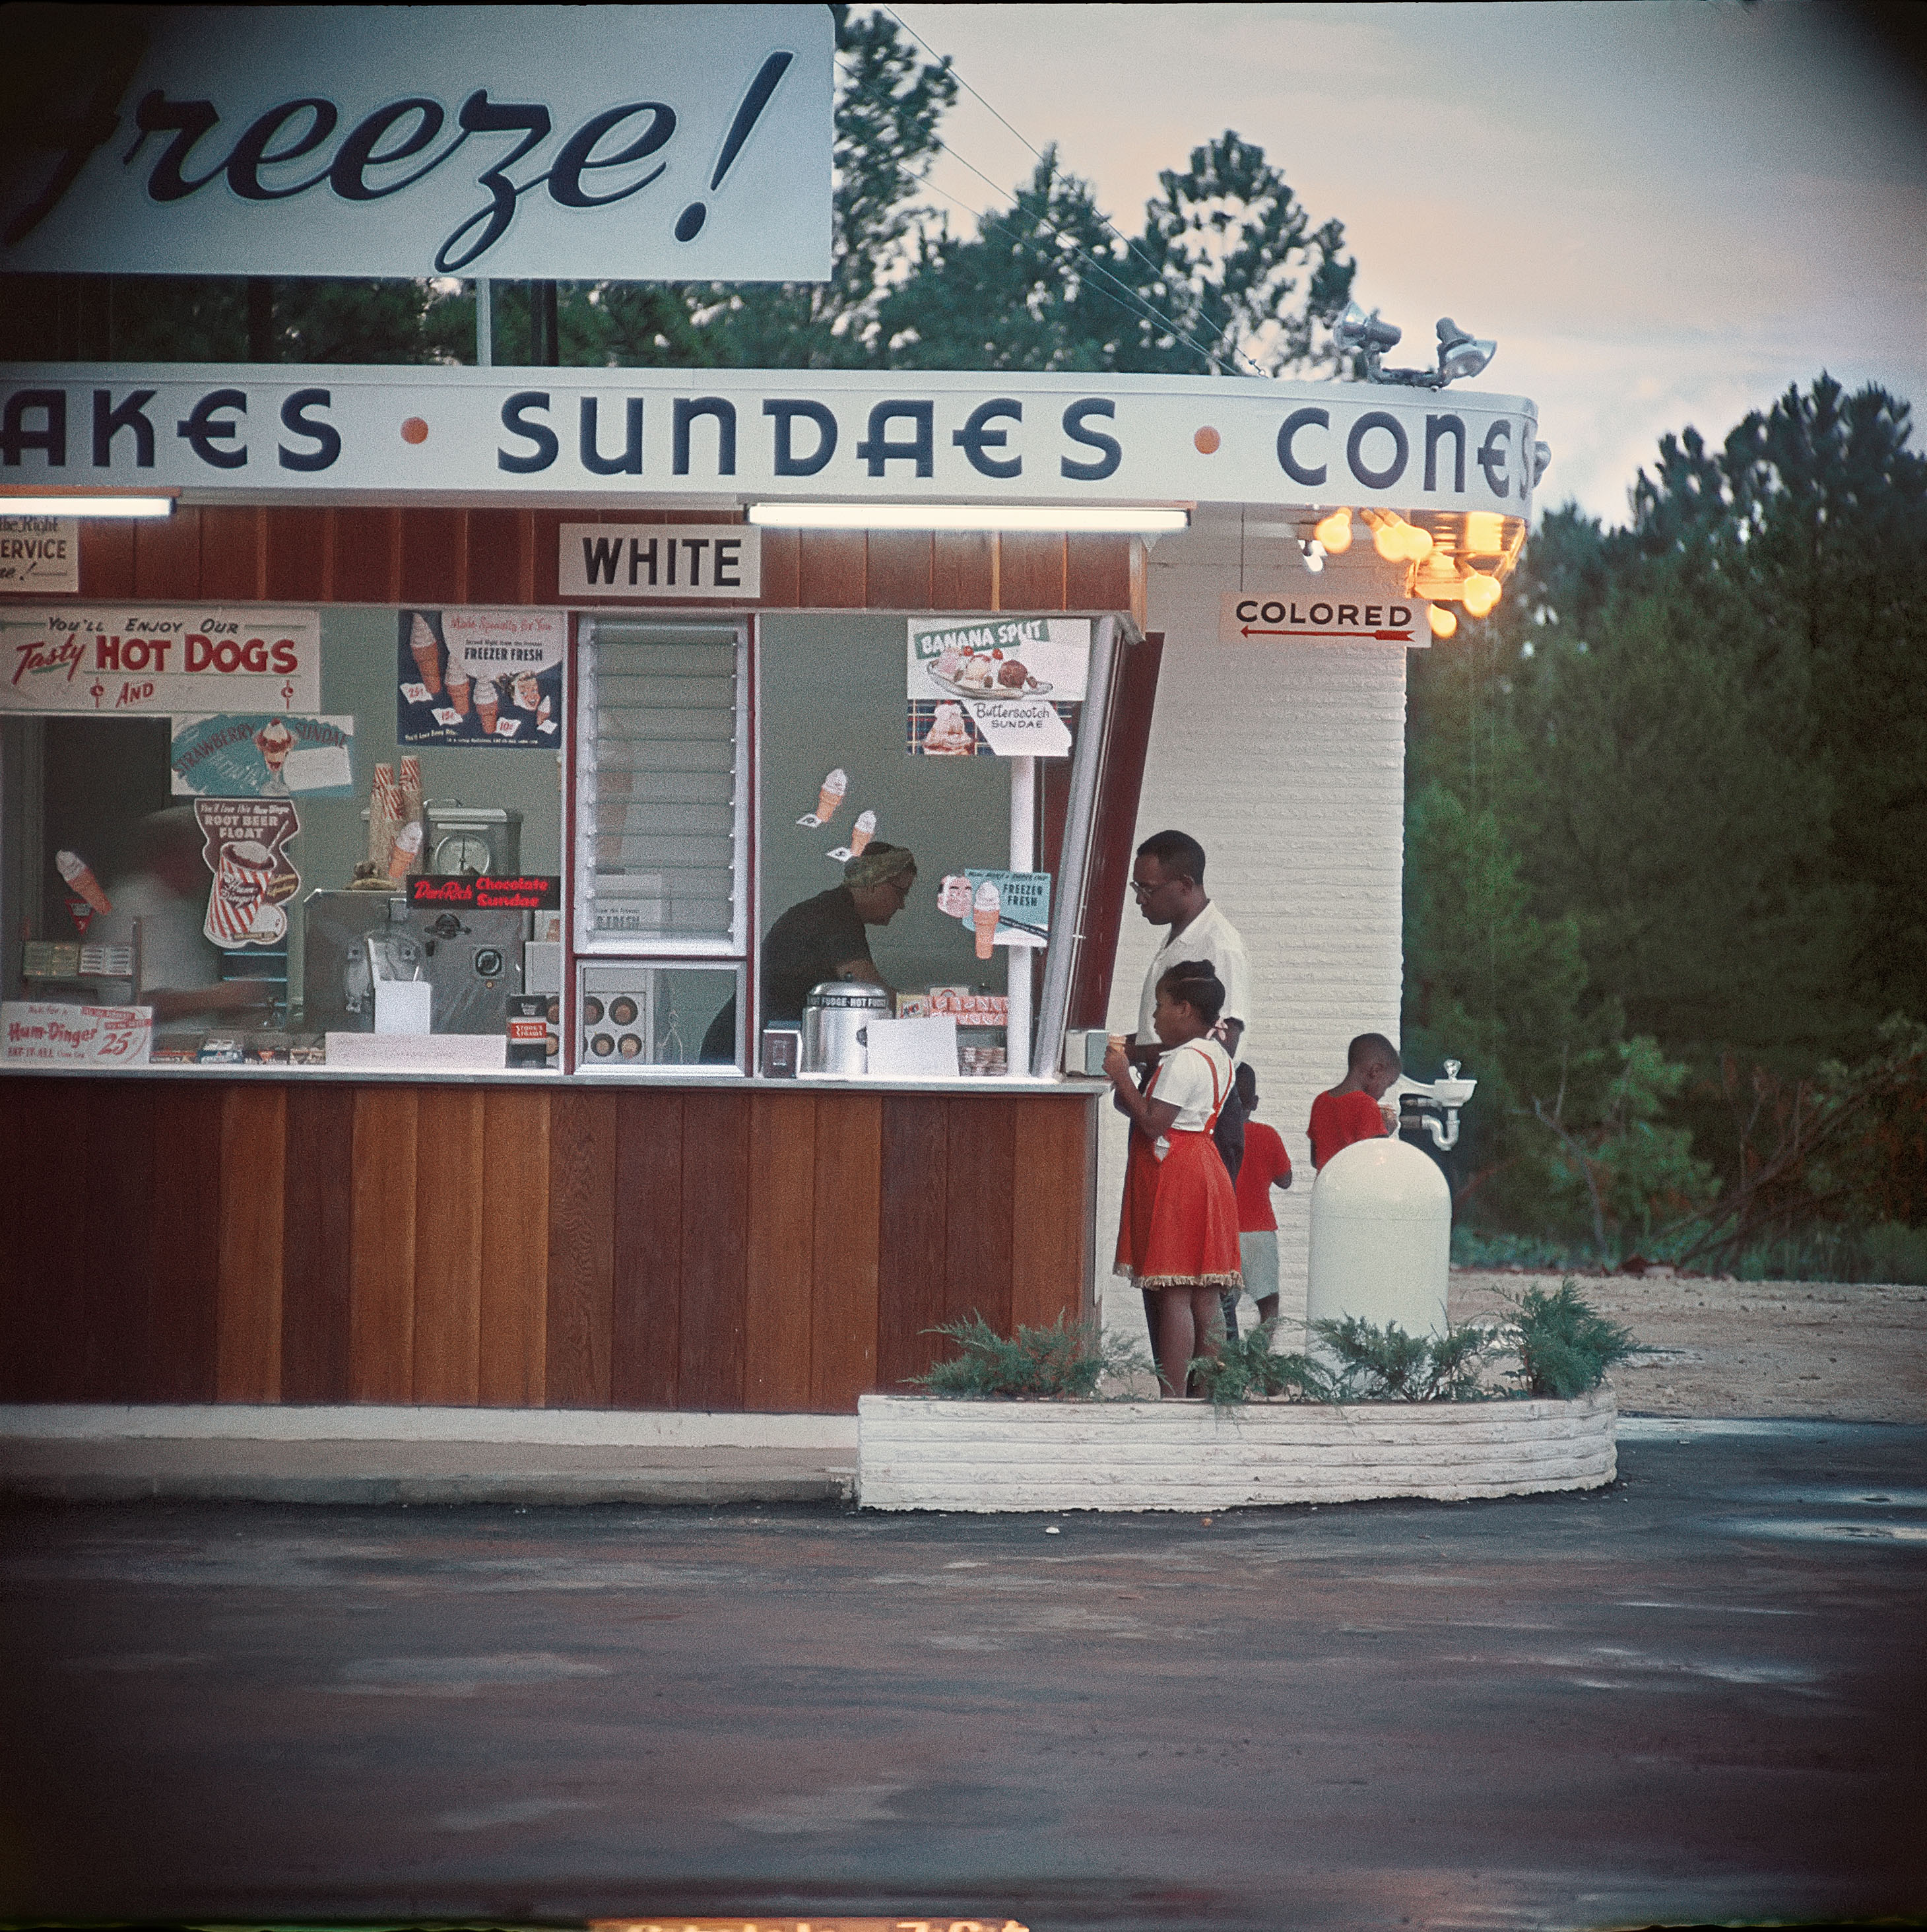 Black man and children being  served at an ice cream stand under a sign reading "colored". A sign above another window reads "white" .